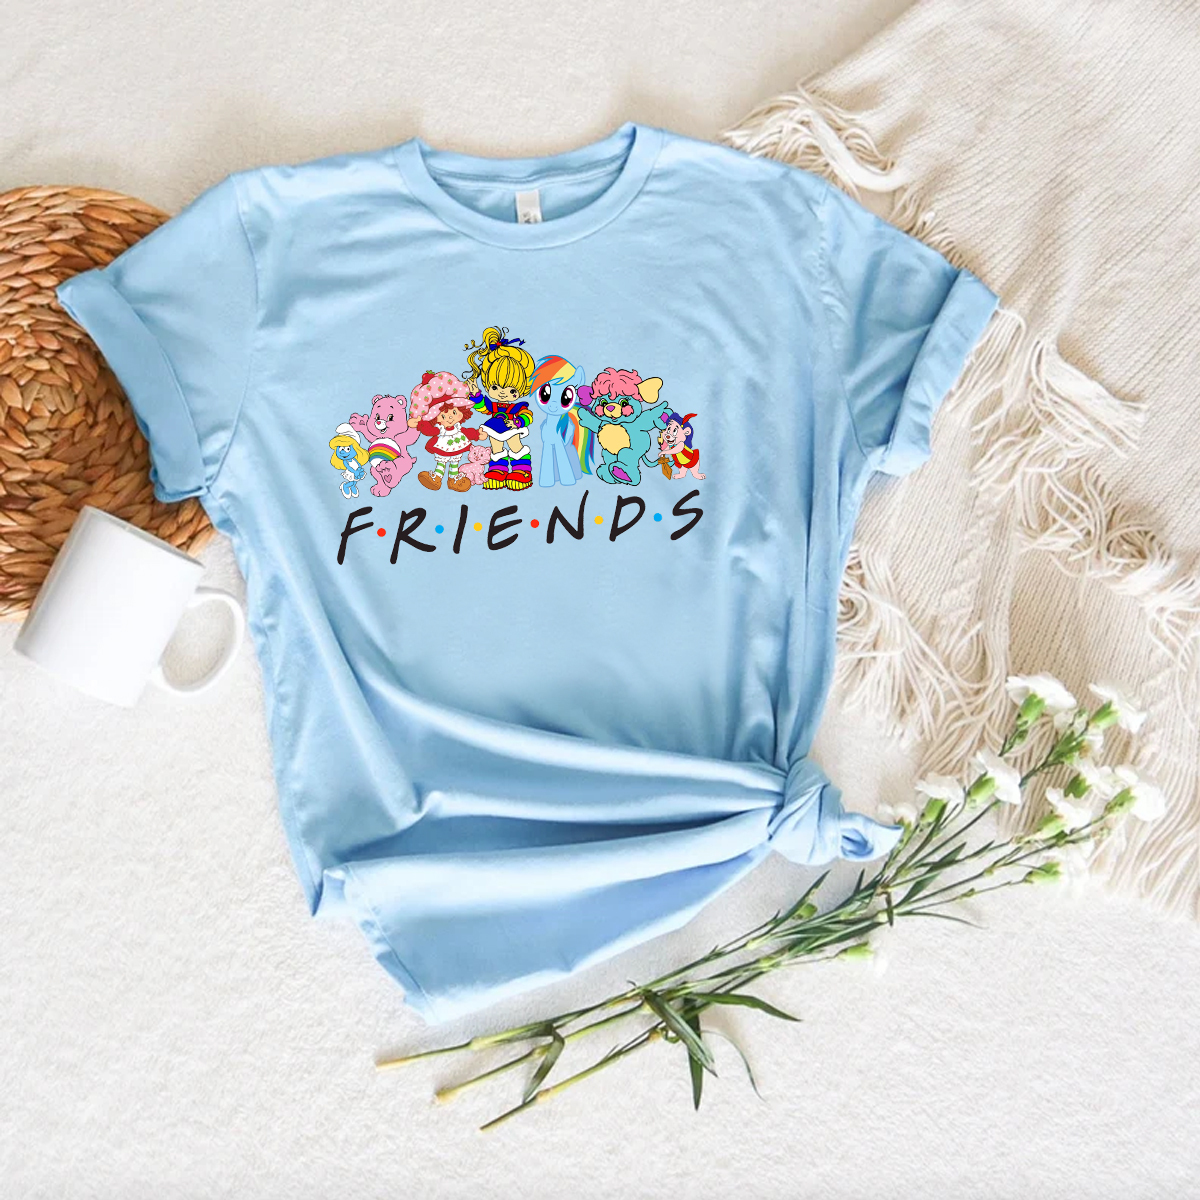 Friends of the 80ss Character mix Shirt, 80s Cartoon Friends Cartoon shirt, Friends Nostalgia Friends of the 80`s Matching Family T-Shirt